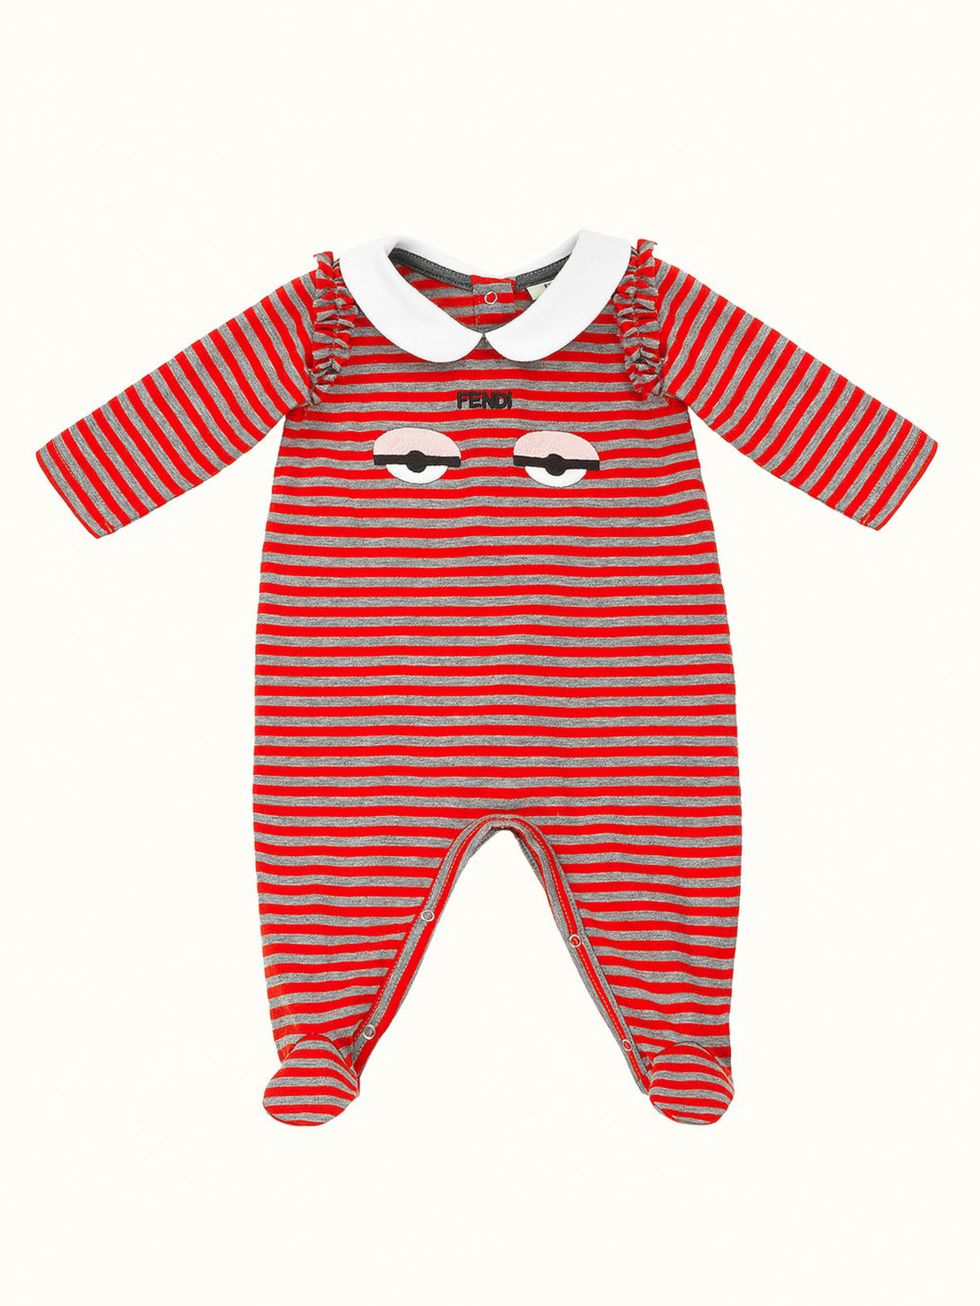 Product, Sleeve, Collar, Red, White, Pattern, Baby & toddler clothing, Carmine, Orange, Baby Products, 